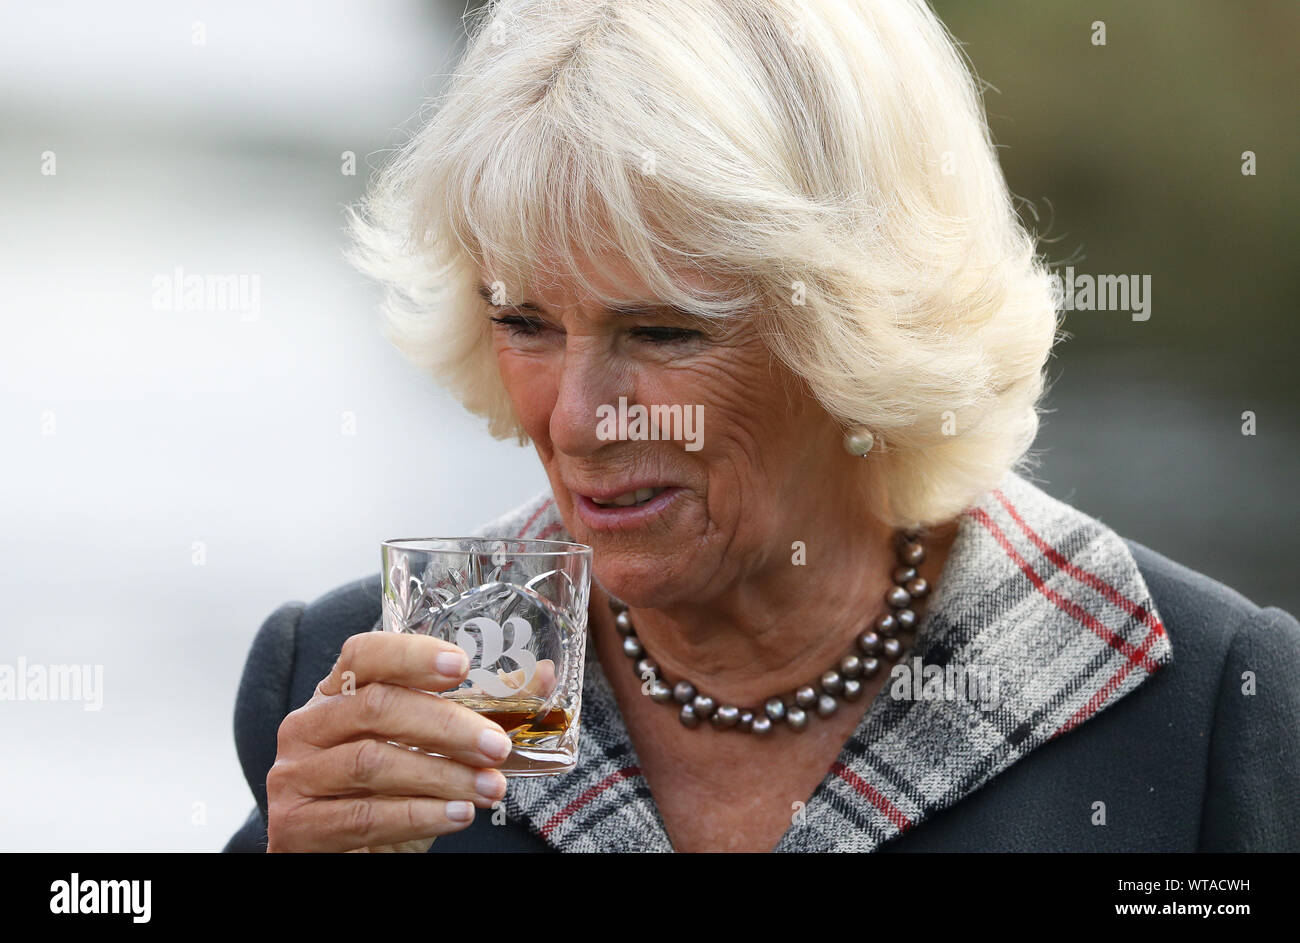 The Duchess of Rothesay has a whisky during a visit to Bladnoch Distillery where the Duke and Duchess officially opened a new visitor centre at the Bladnoch Distillery at Bladnoch Distillery, the southernmost distillery in Scotland dating back to 1817, in Bladnoch, Galloway, Scotland. PA Photo. Picture date: Wednesday September 11, 2019. See PA story ROYAL Charles. Photo credit should read: Andrew Milligan/PA Wire Stock Photo